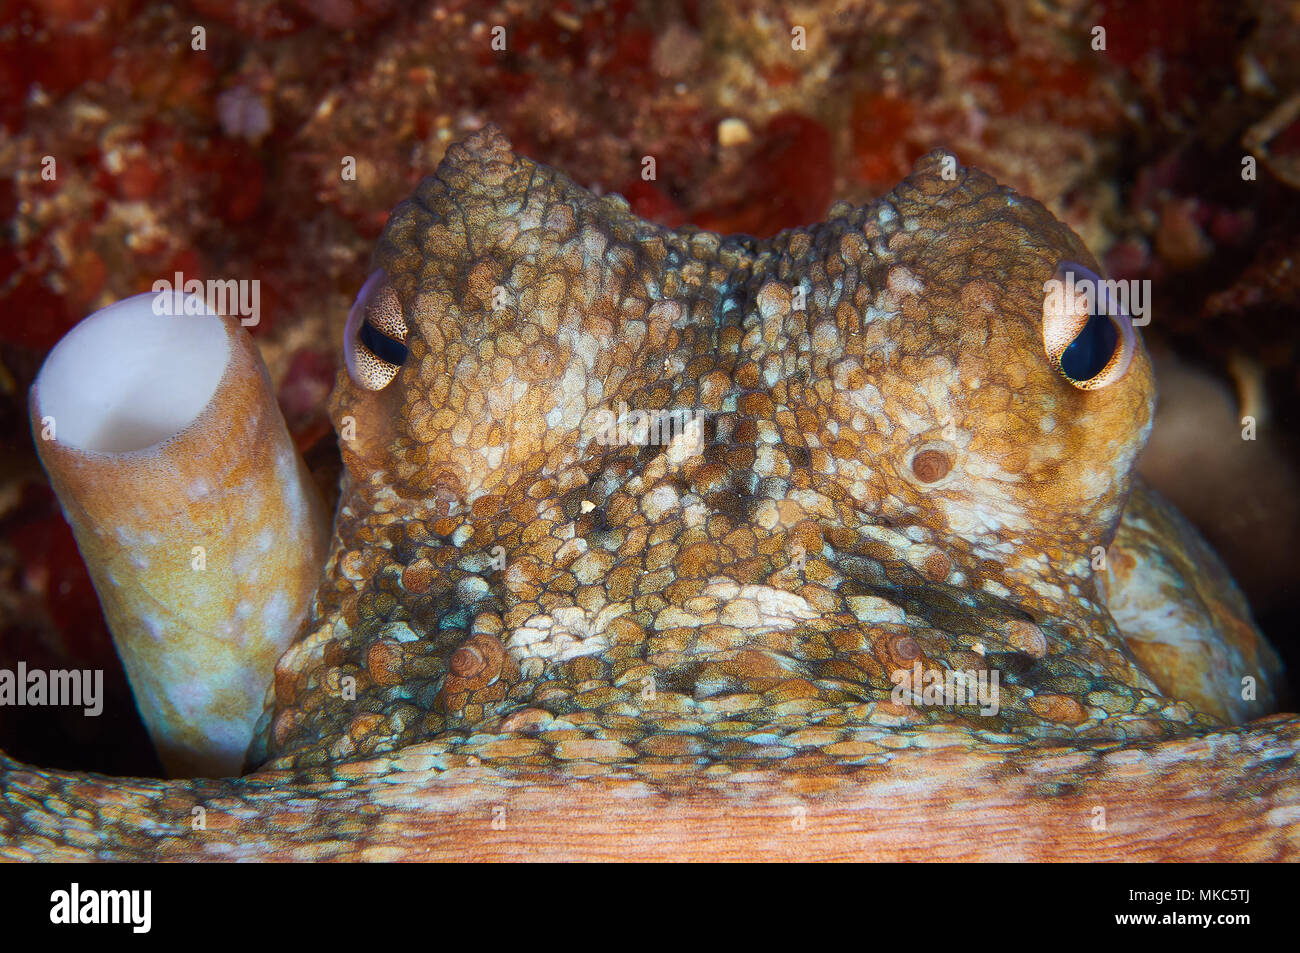 Closeup of the eyes and funnel of a common octopus (Octopus vulgaris) in Ses Salines Natural Park (Formentera, Balearic Islands, Mediterranean Sea) Stock Photo